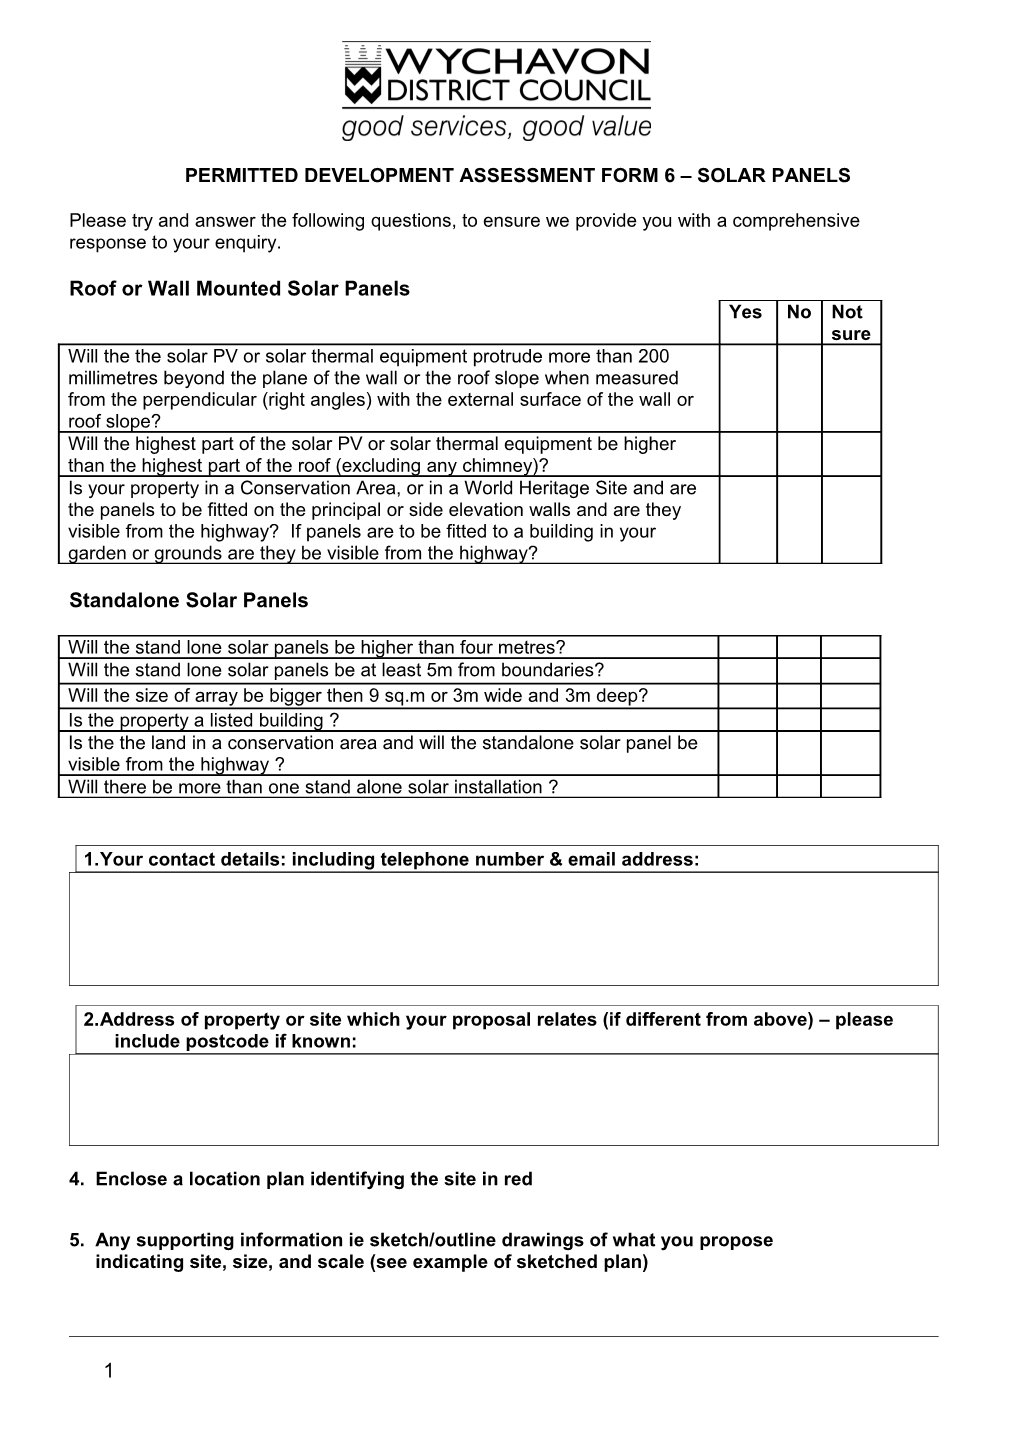 Permitted Development Self Assessment Form 1 - Extensions